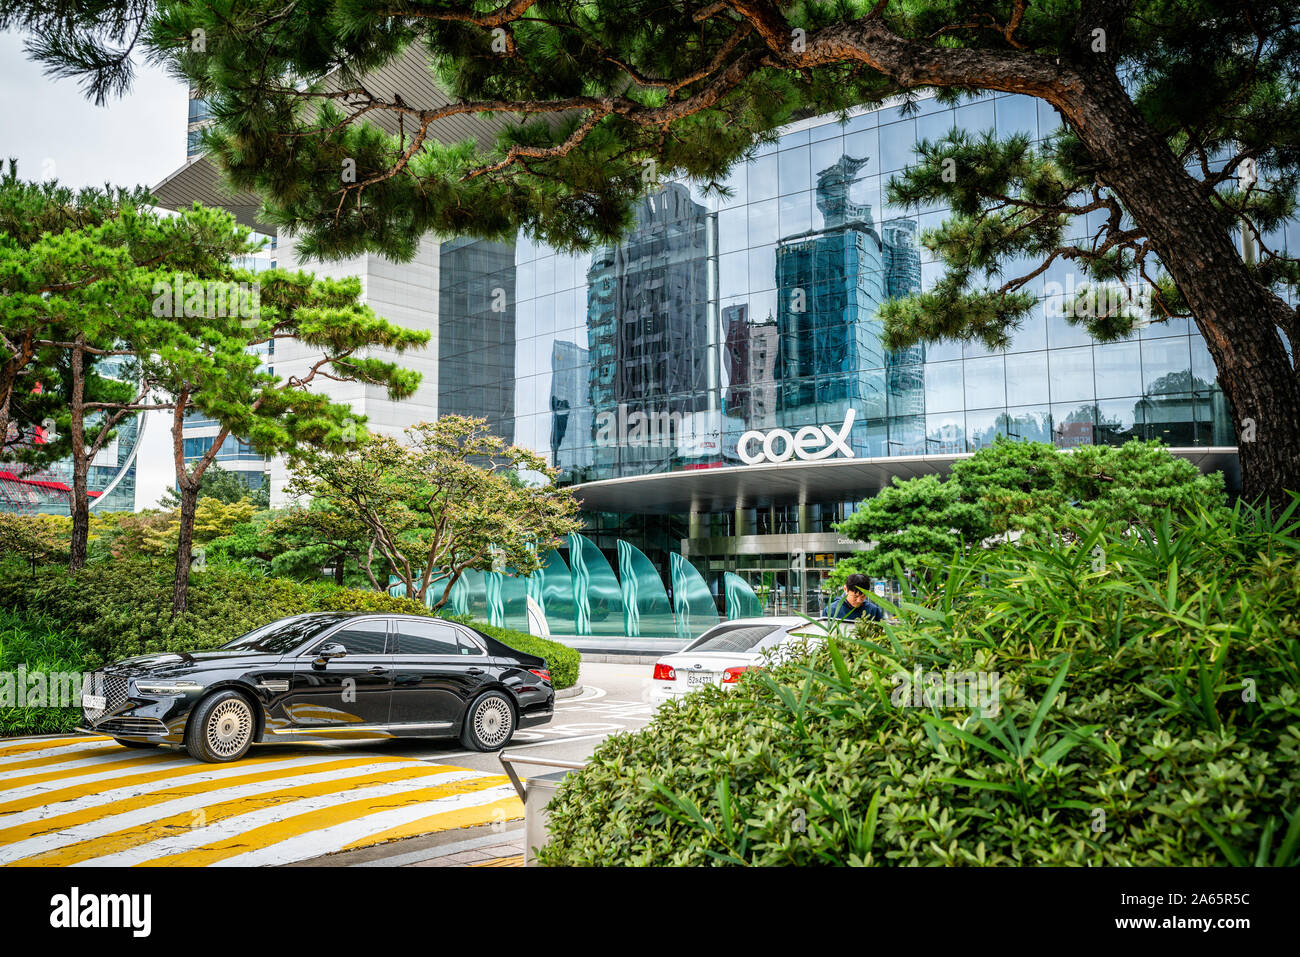 Seoul Korea , 20 September 2019 : Coex conference centre building entrance with sign in Gangnam district Seoul South Korea Stock Photo